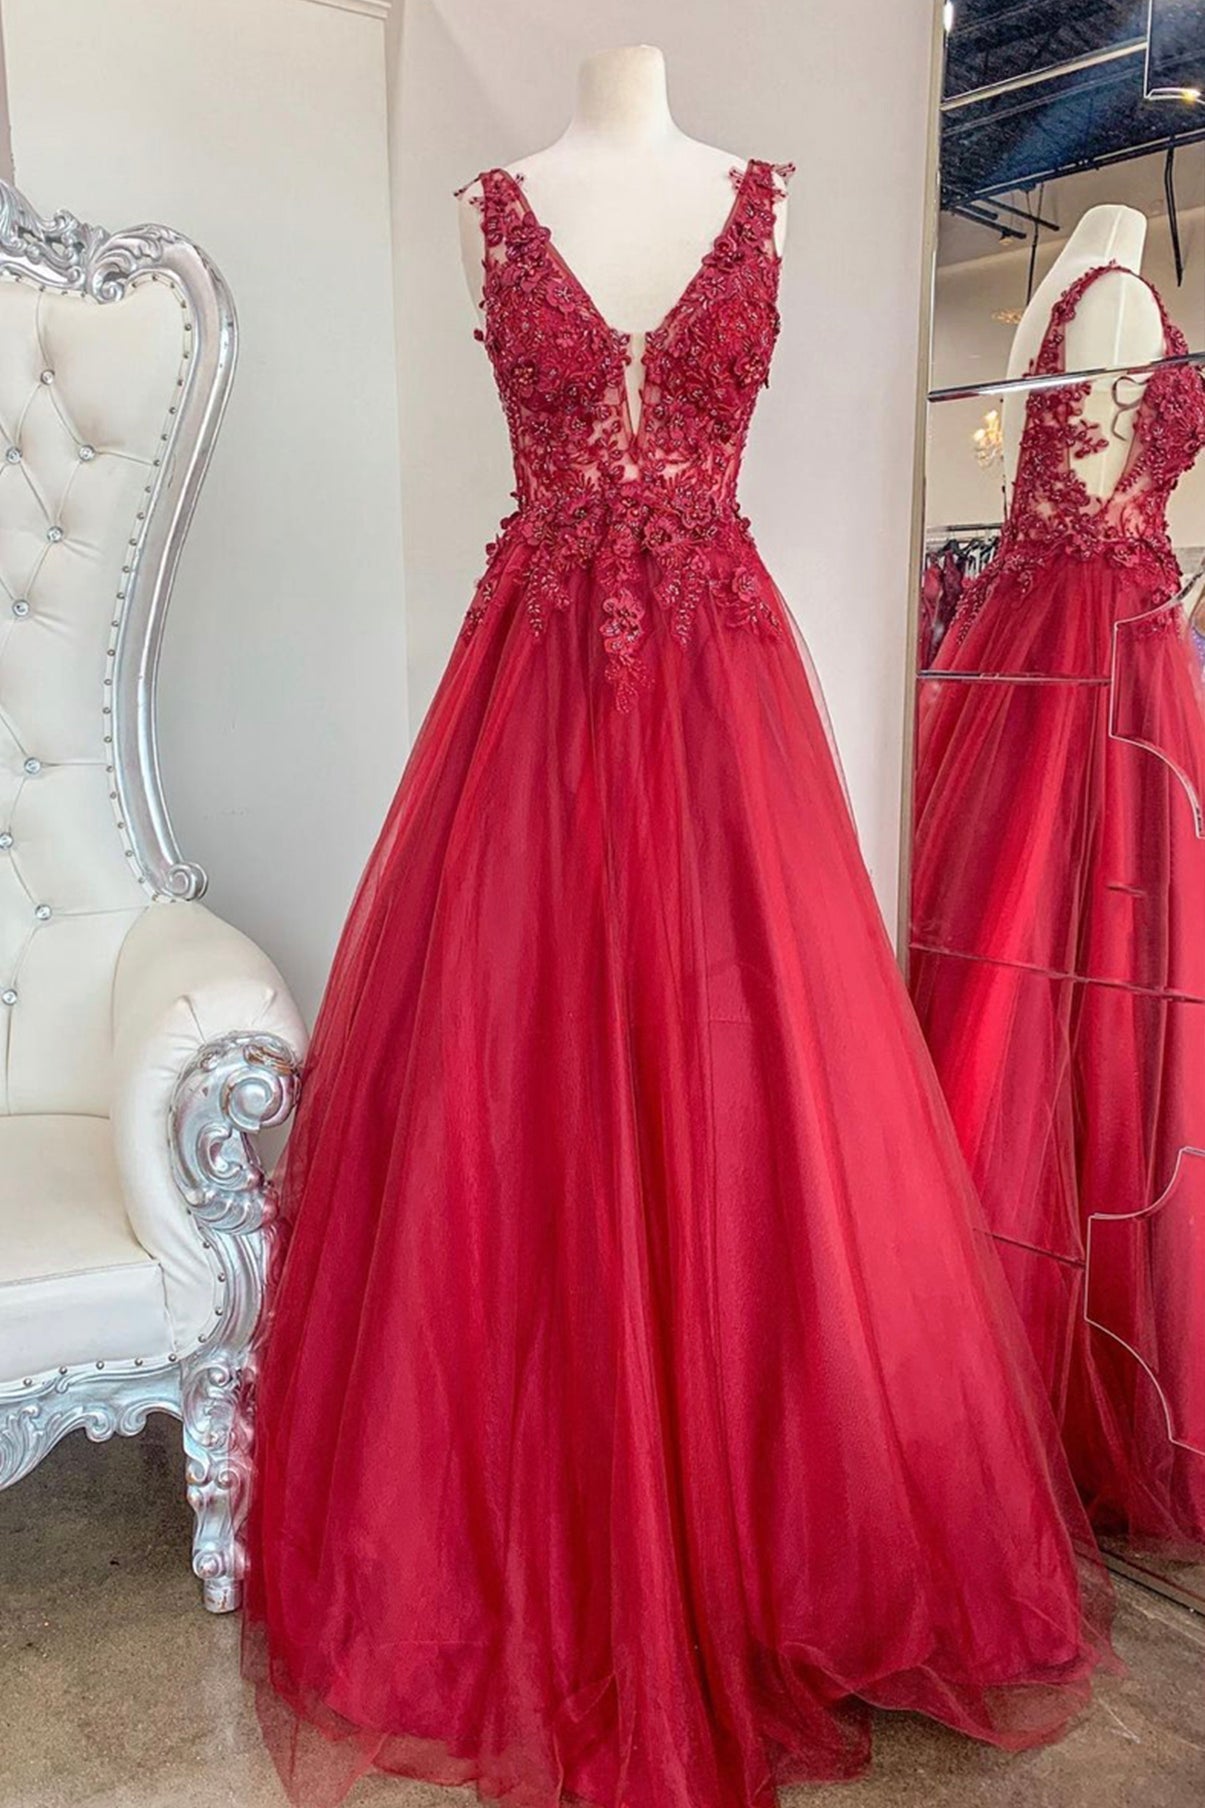 Long Dress Outfit, Red V-Neck Tulle Lace Long Prom Dresses, A-Line Red Evening Party Dresses